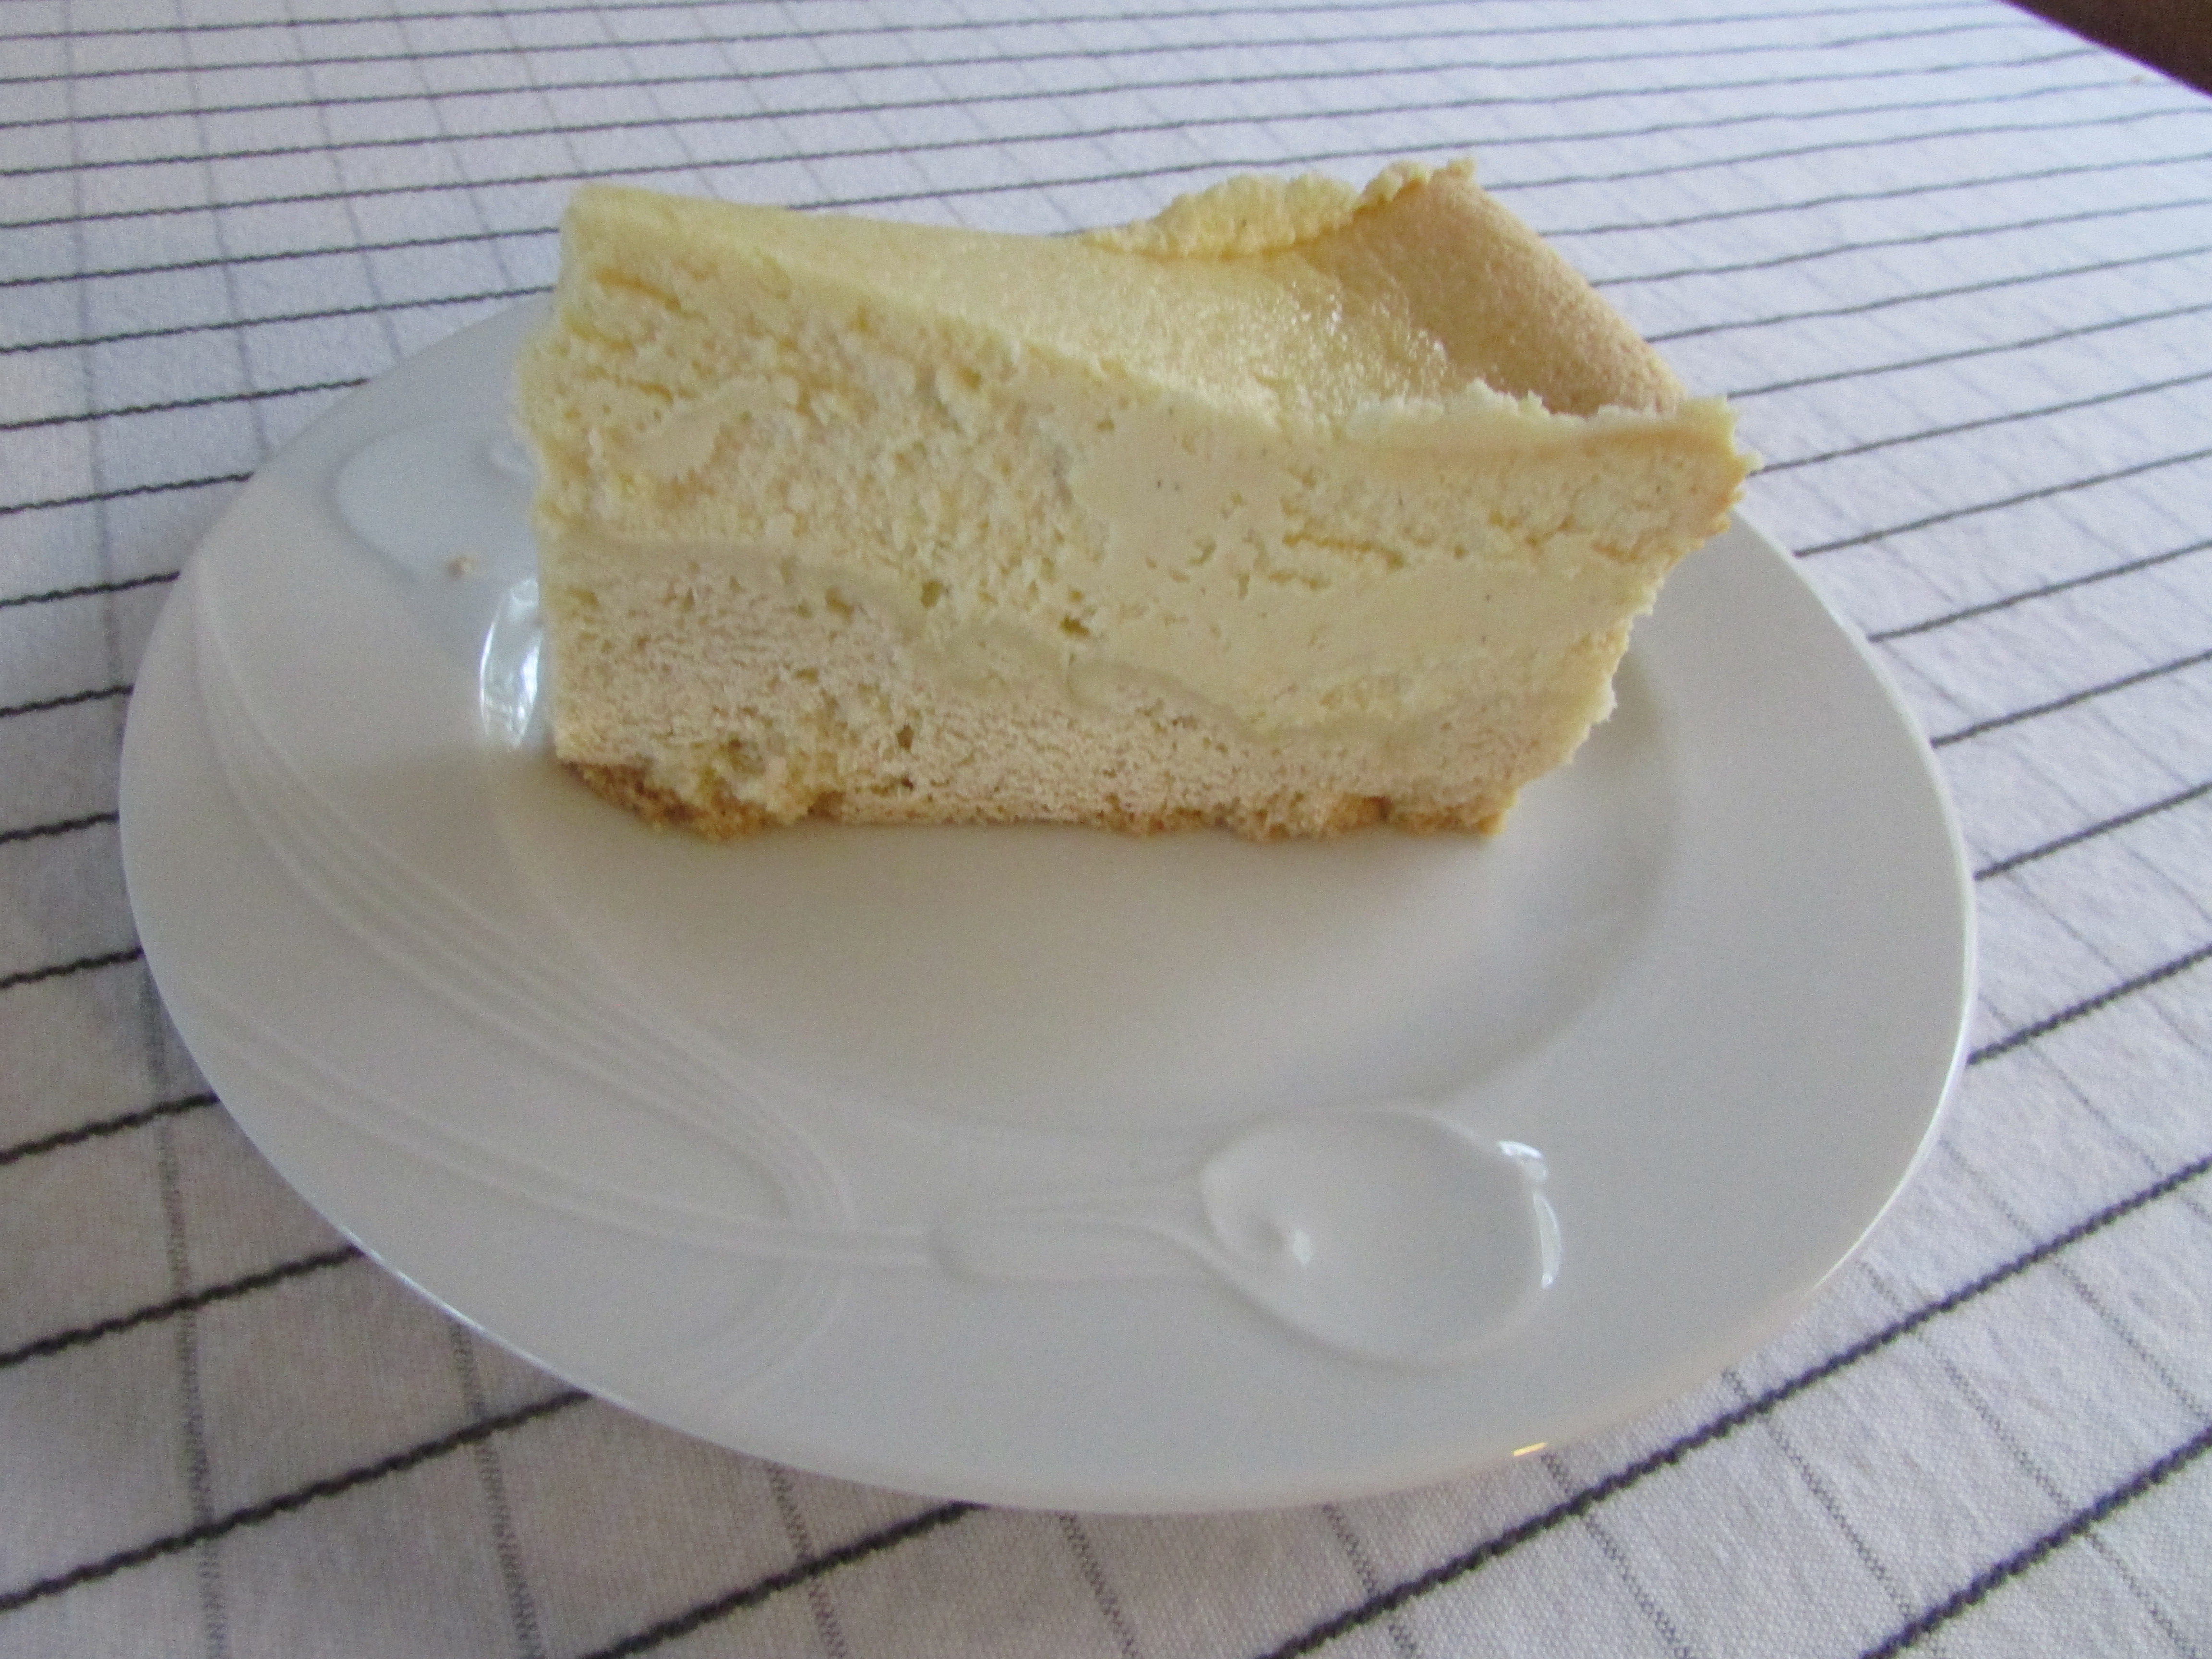 <p>This luxurious lemon cheesecake made with ricotta and mascarpone cheese has been passed down the generations. BigShotsMom gave it 5 stars: "I wish I could give this more stars! Italian cheesecake is so different from the usual cream cheese based cake - there is really no comparison."</p>
                          